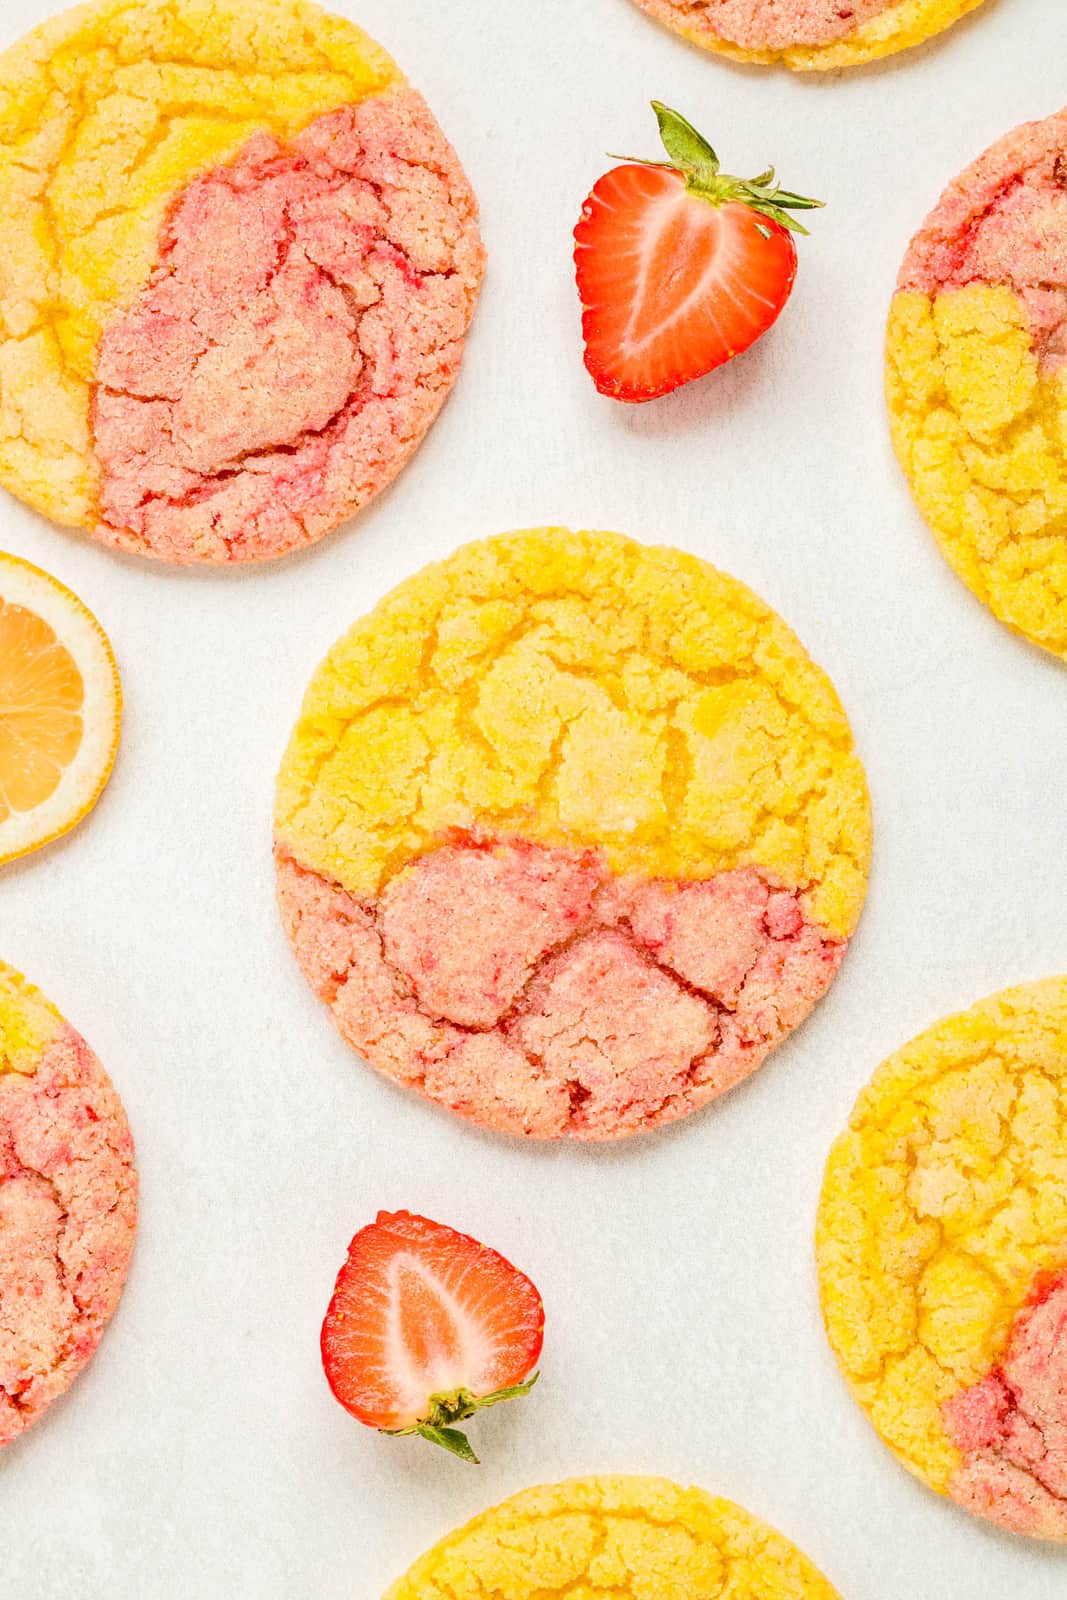 Cookies on parchment paper with strawberries and lemons.